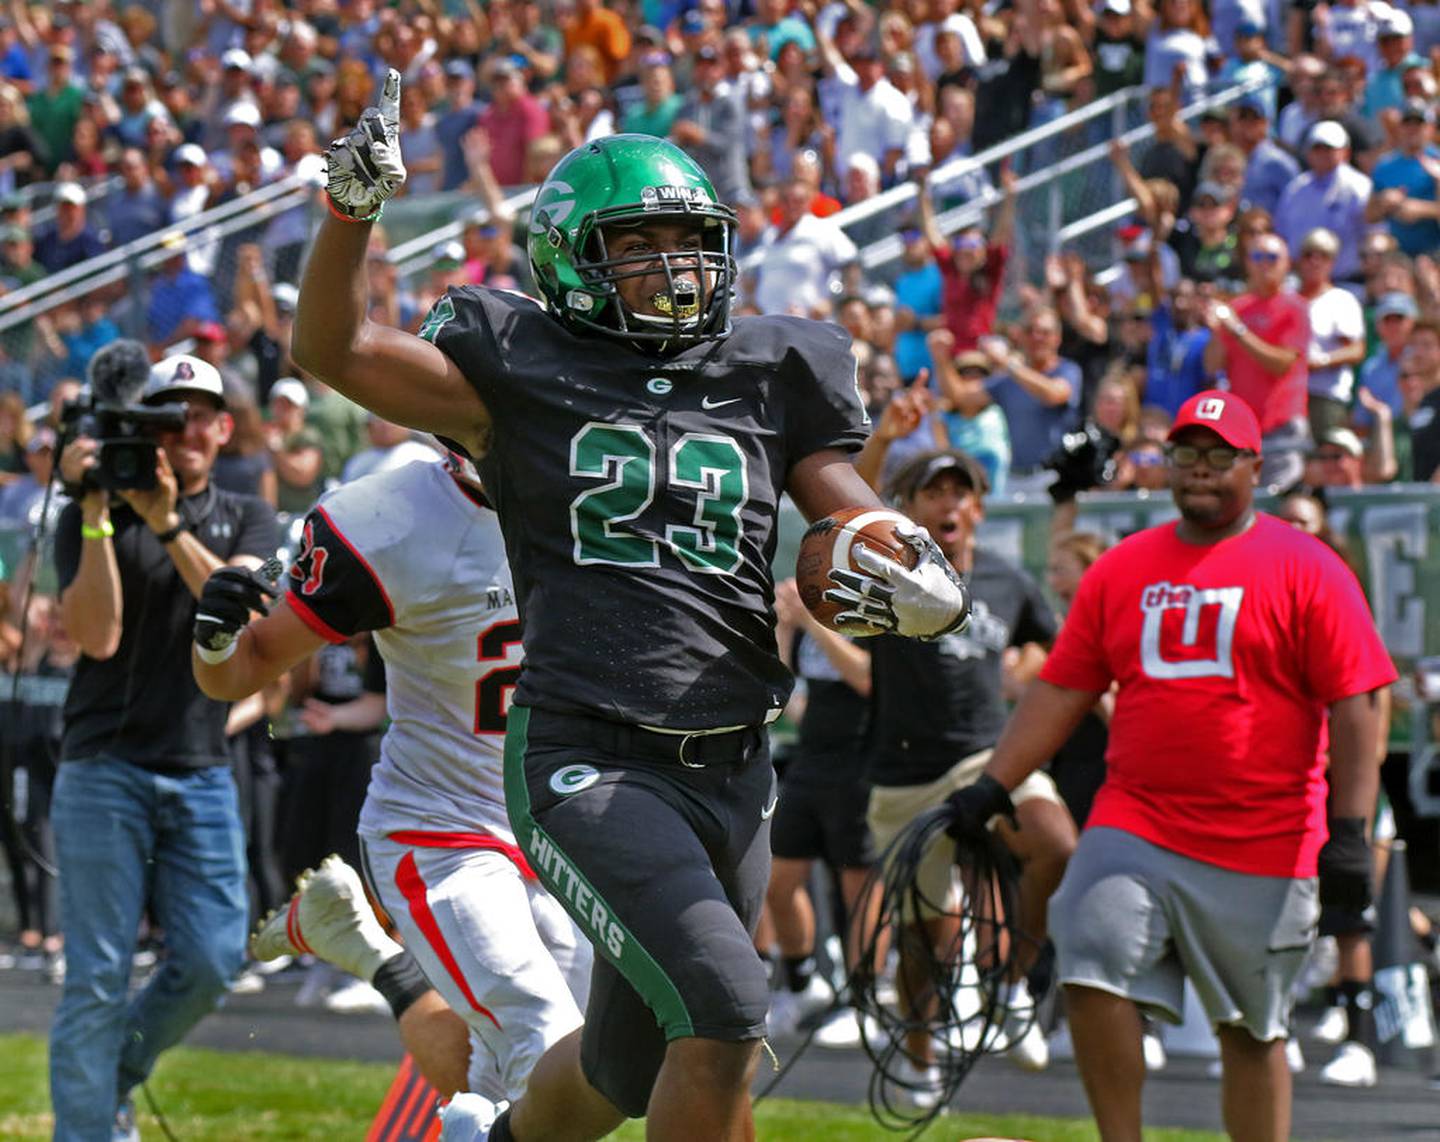 Glenbard West running back Jalen Moore scores a touchdown during a game against visiting Maine South on Saturday, Aug. 31 2019.